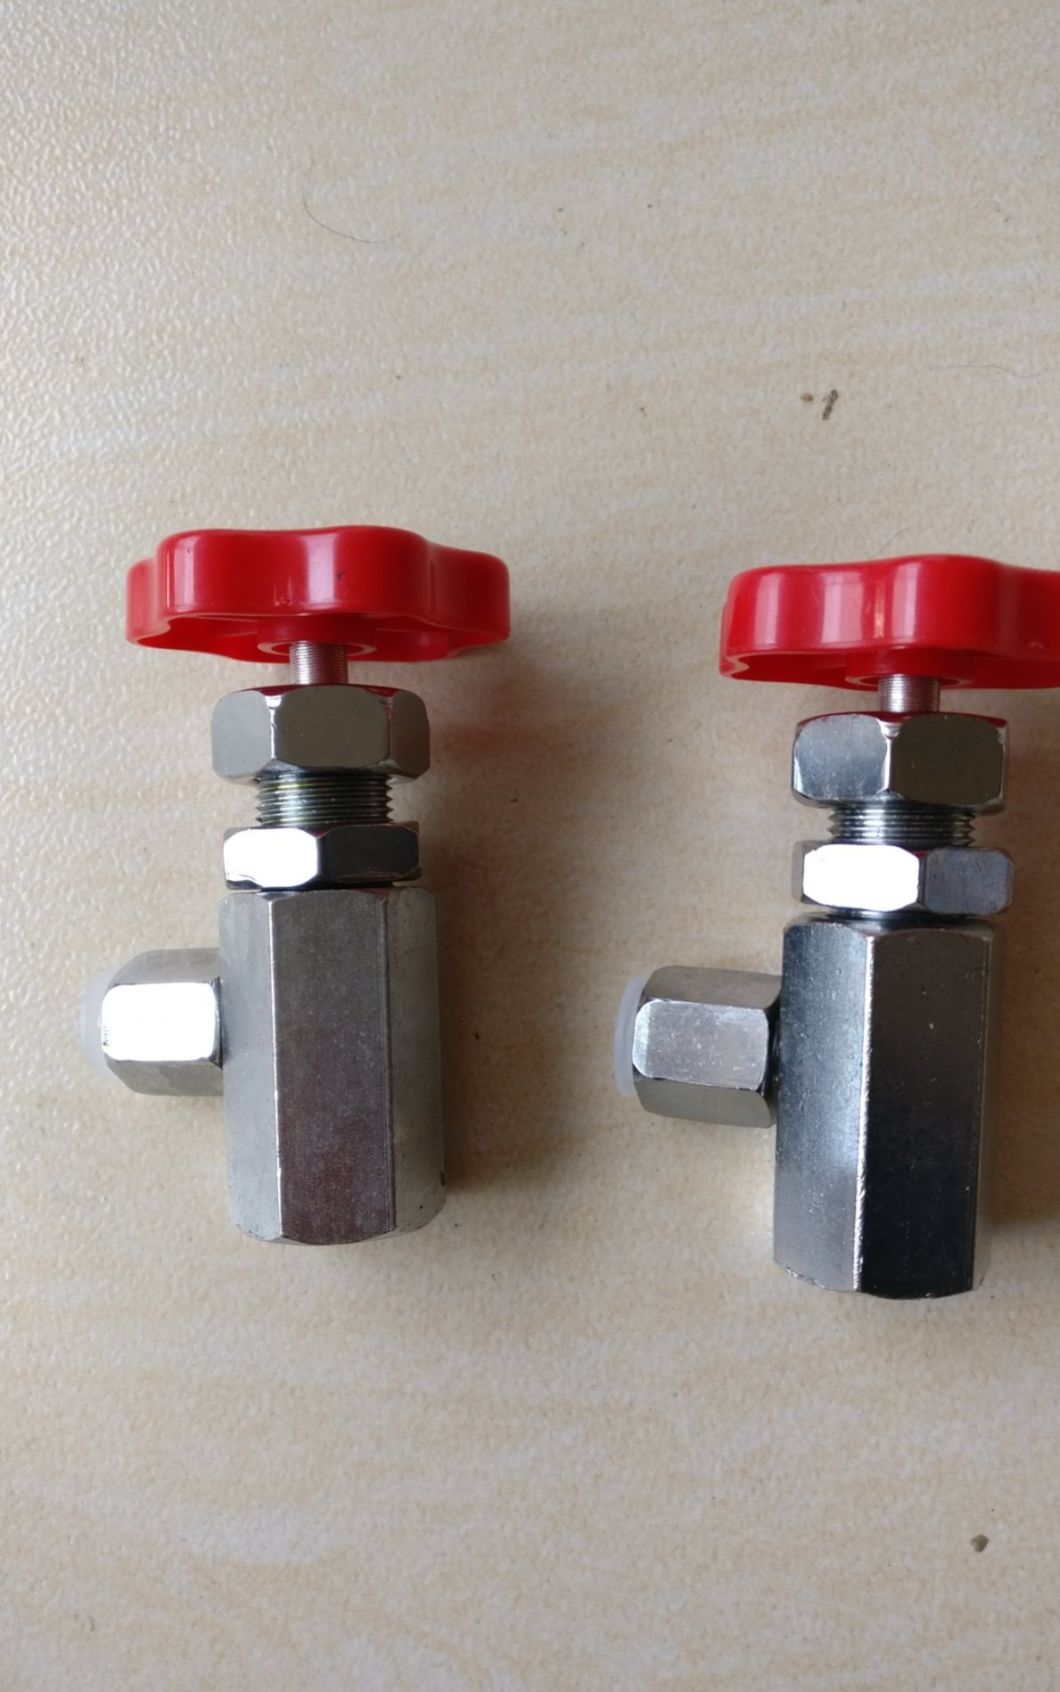 Kf Model Pressure Gauge Switch for Sale in China